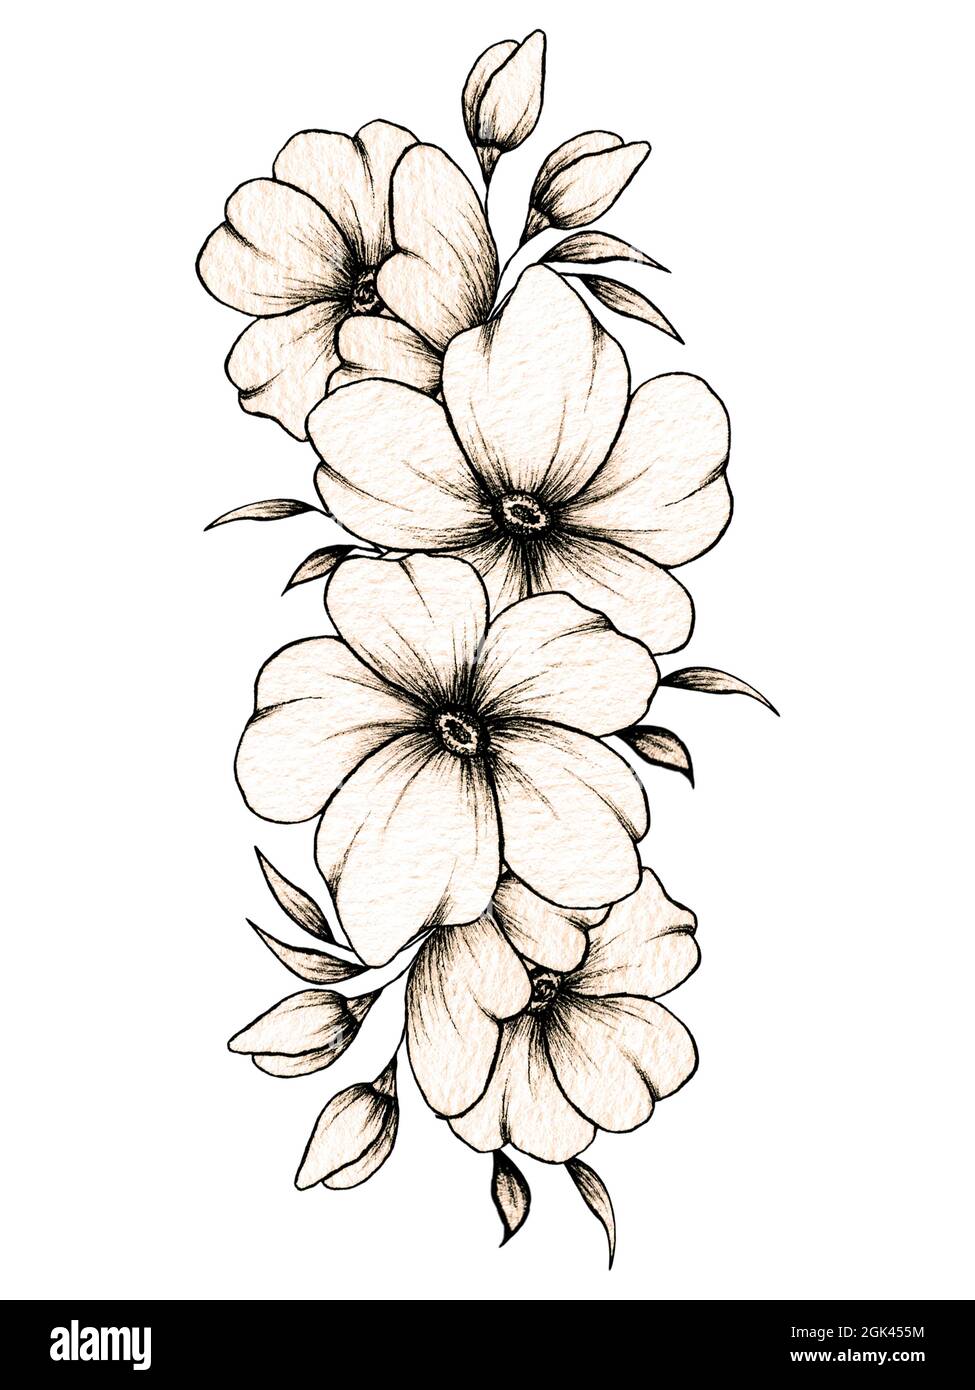 Line art hand drawn floral composition with various big and small ...